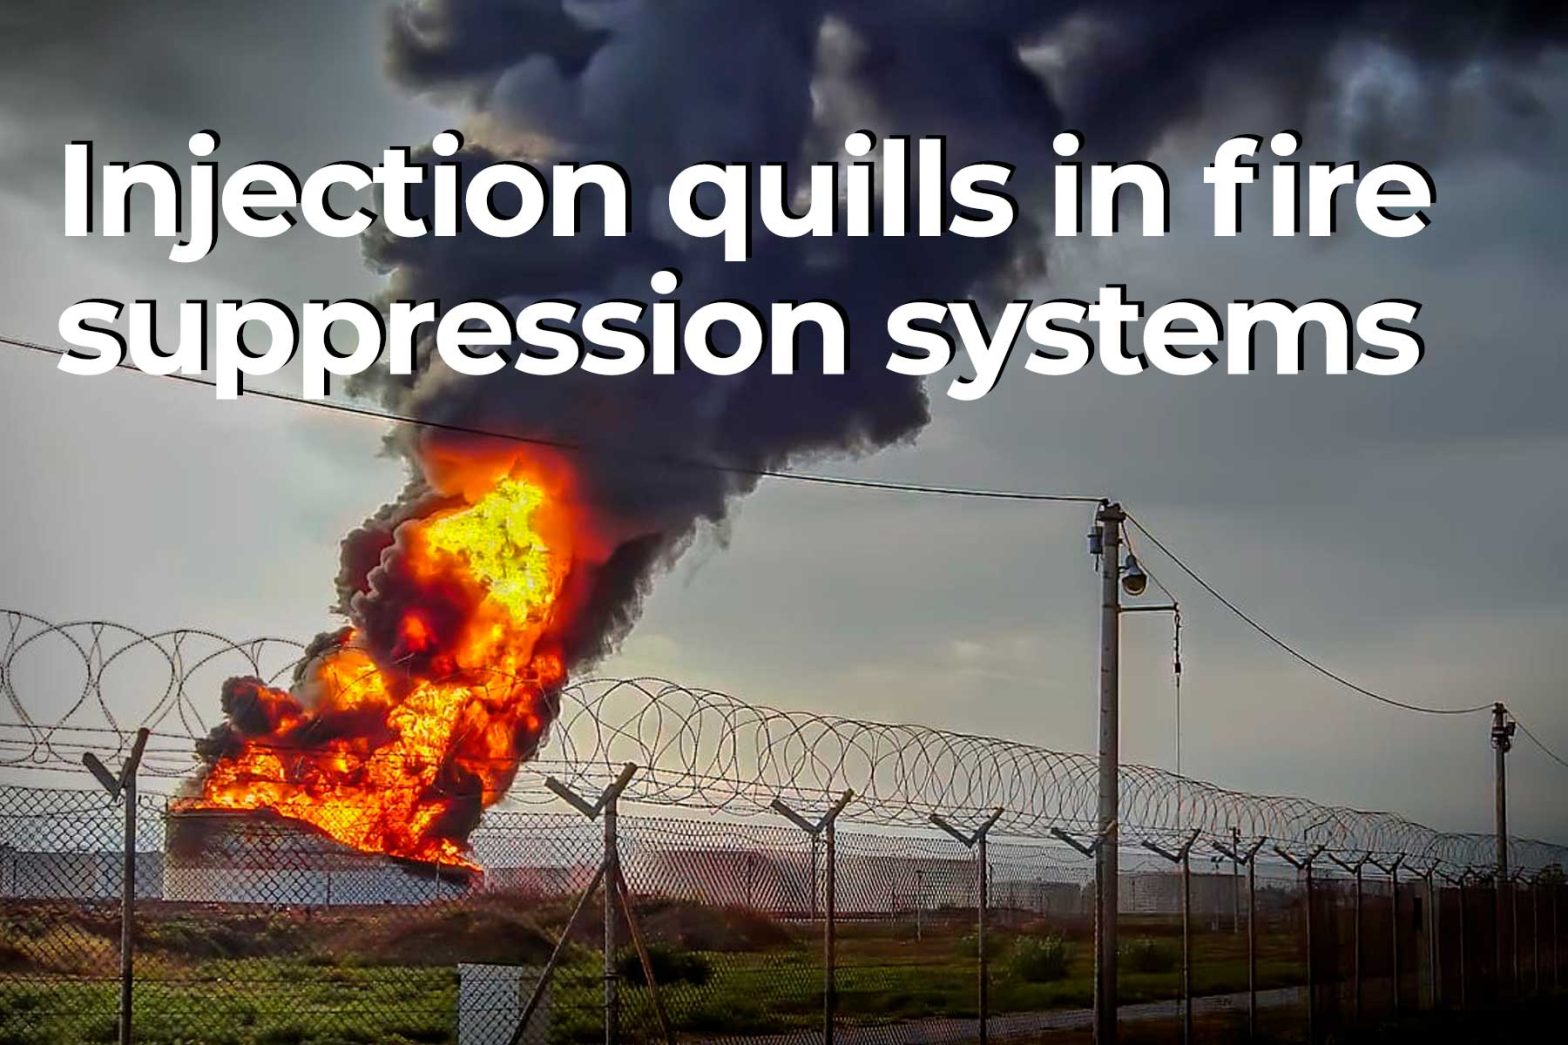 Benefits of using injection quills in fire suppression systems